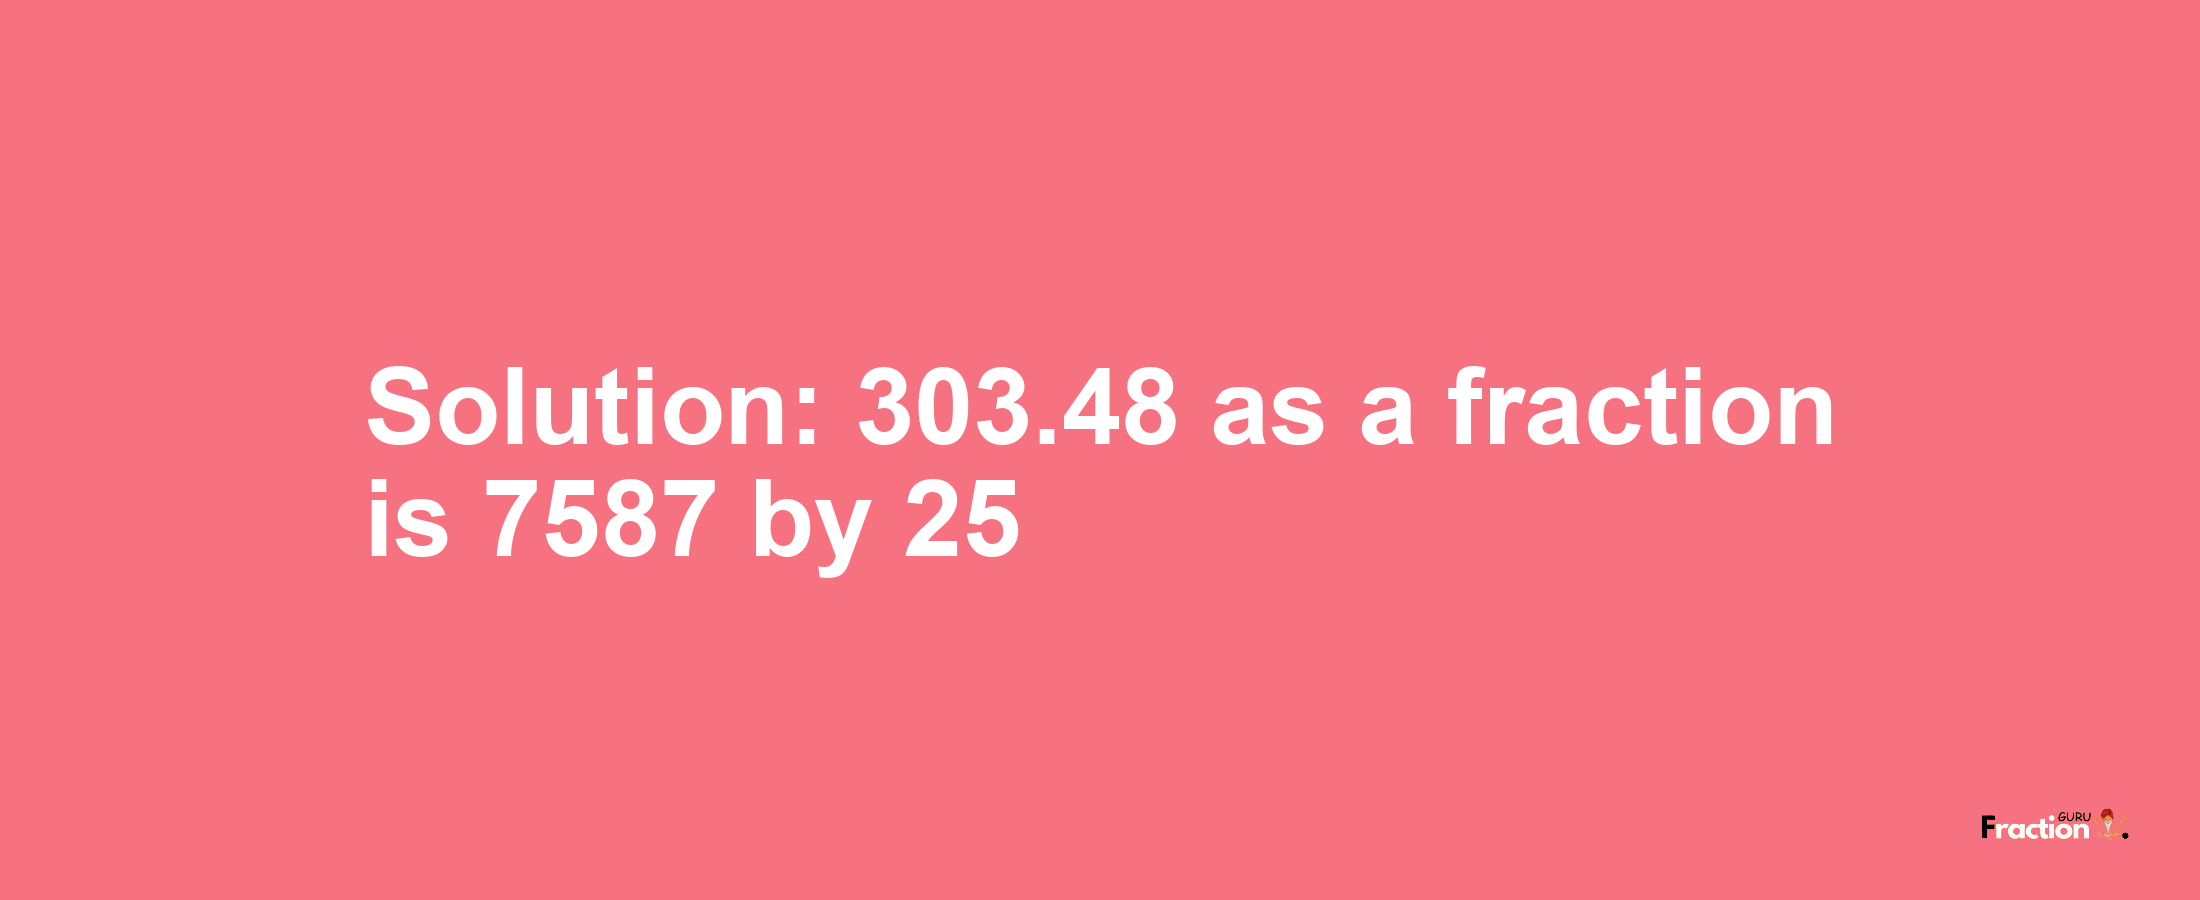 Solution:303.48 as a fraction is 7587/25